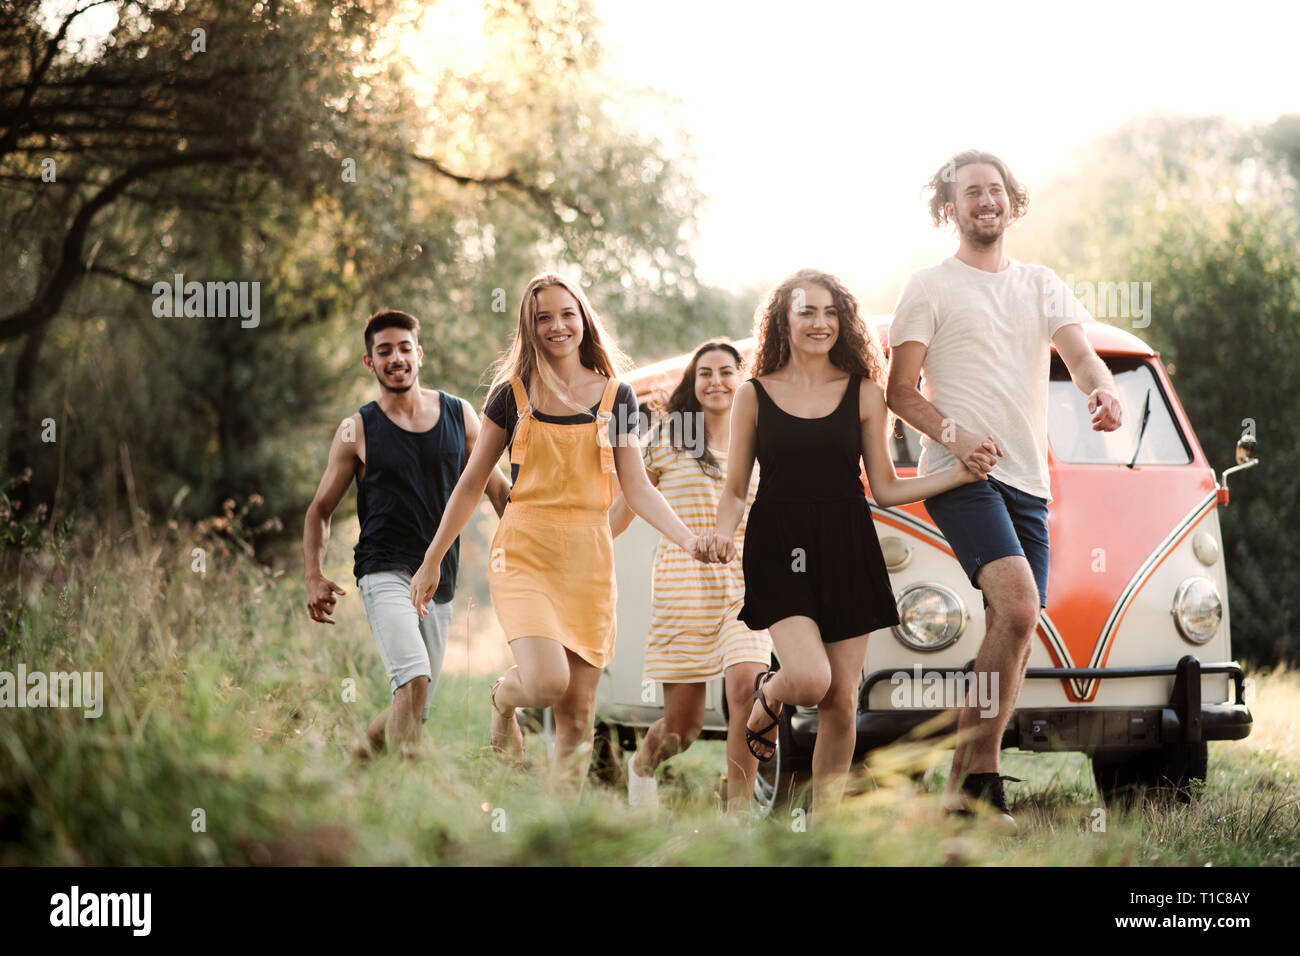 A group of young friends on a roadtrip through countryside, running. Stock Photo